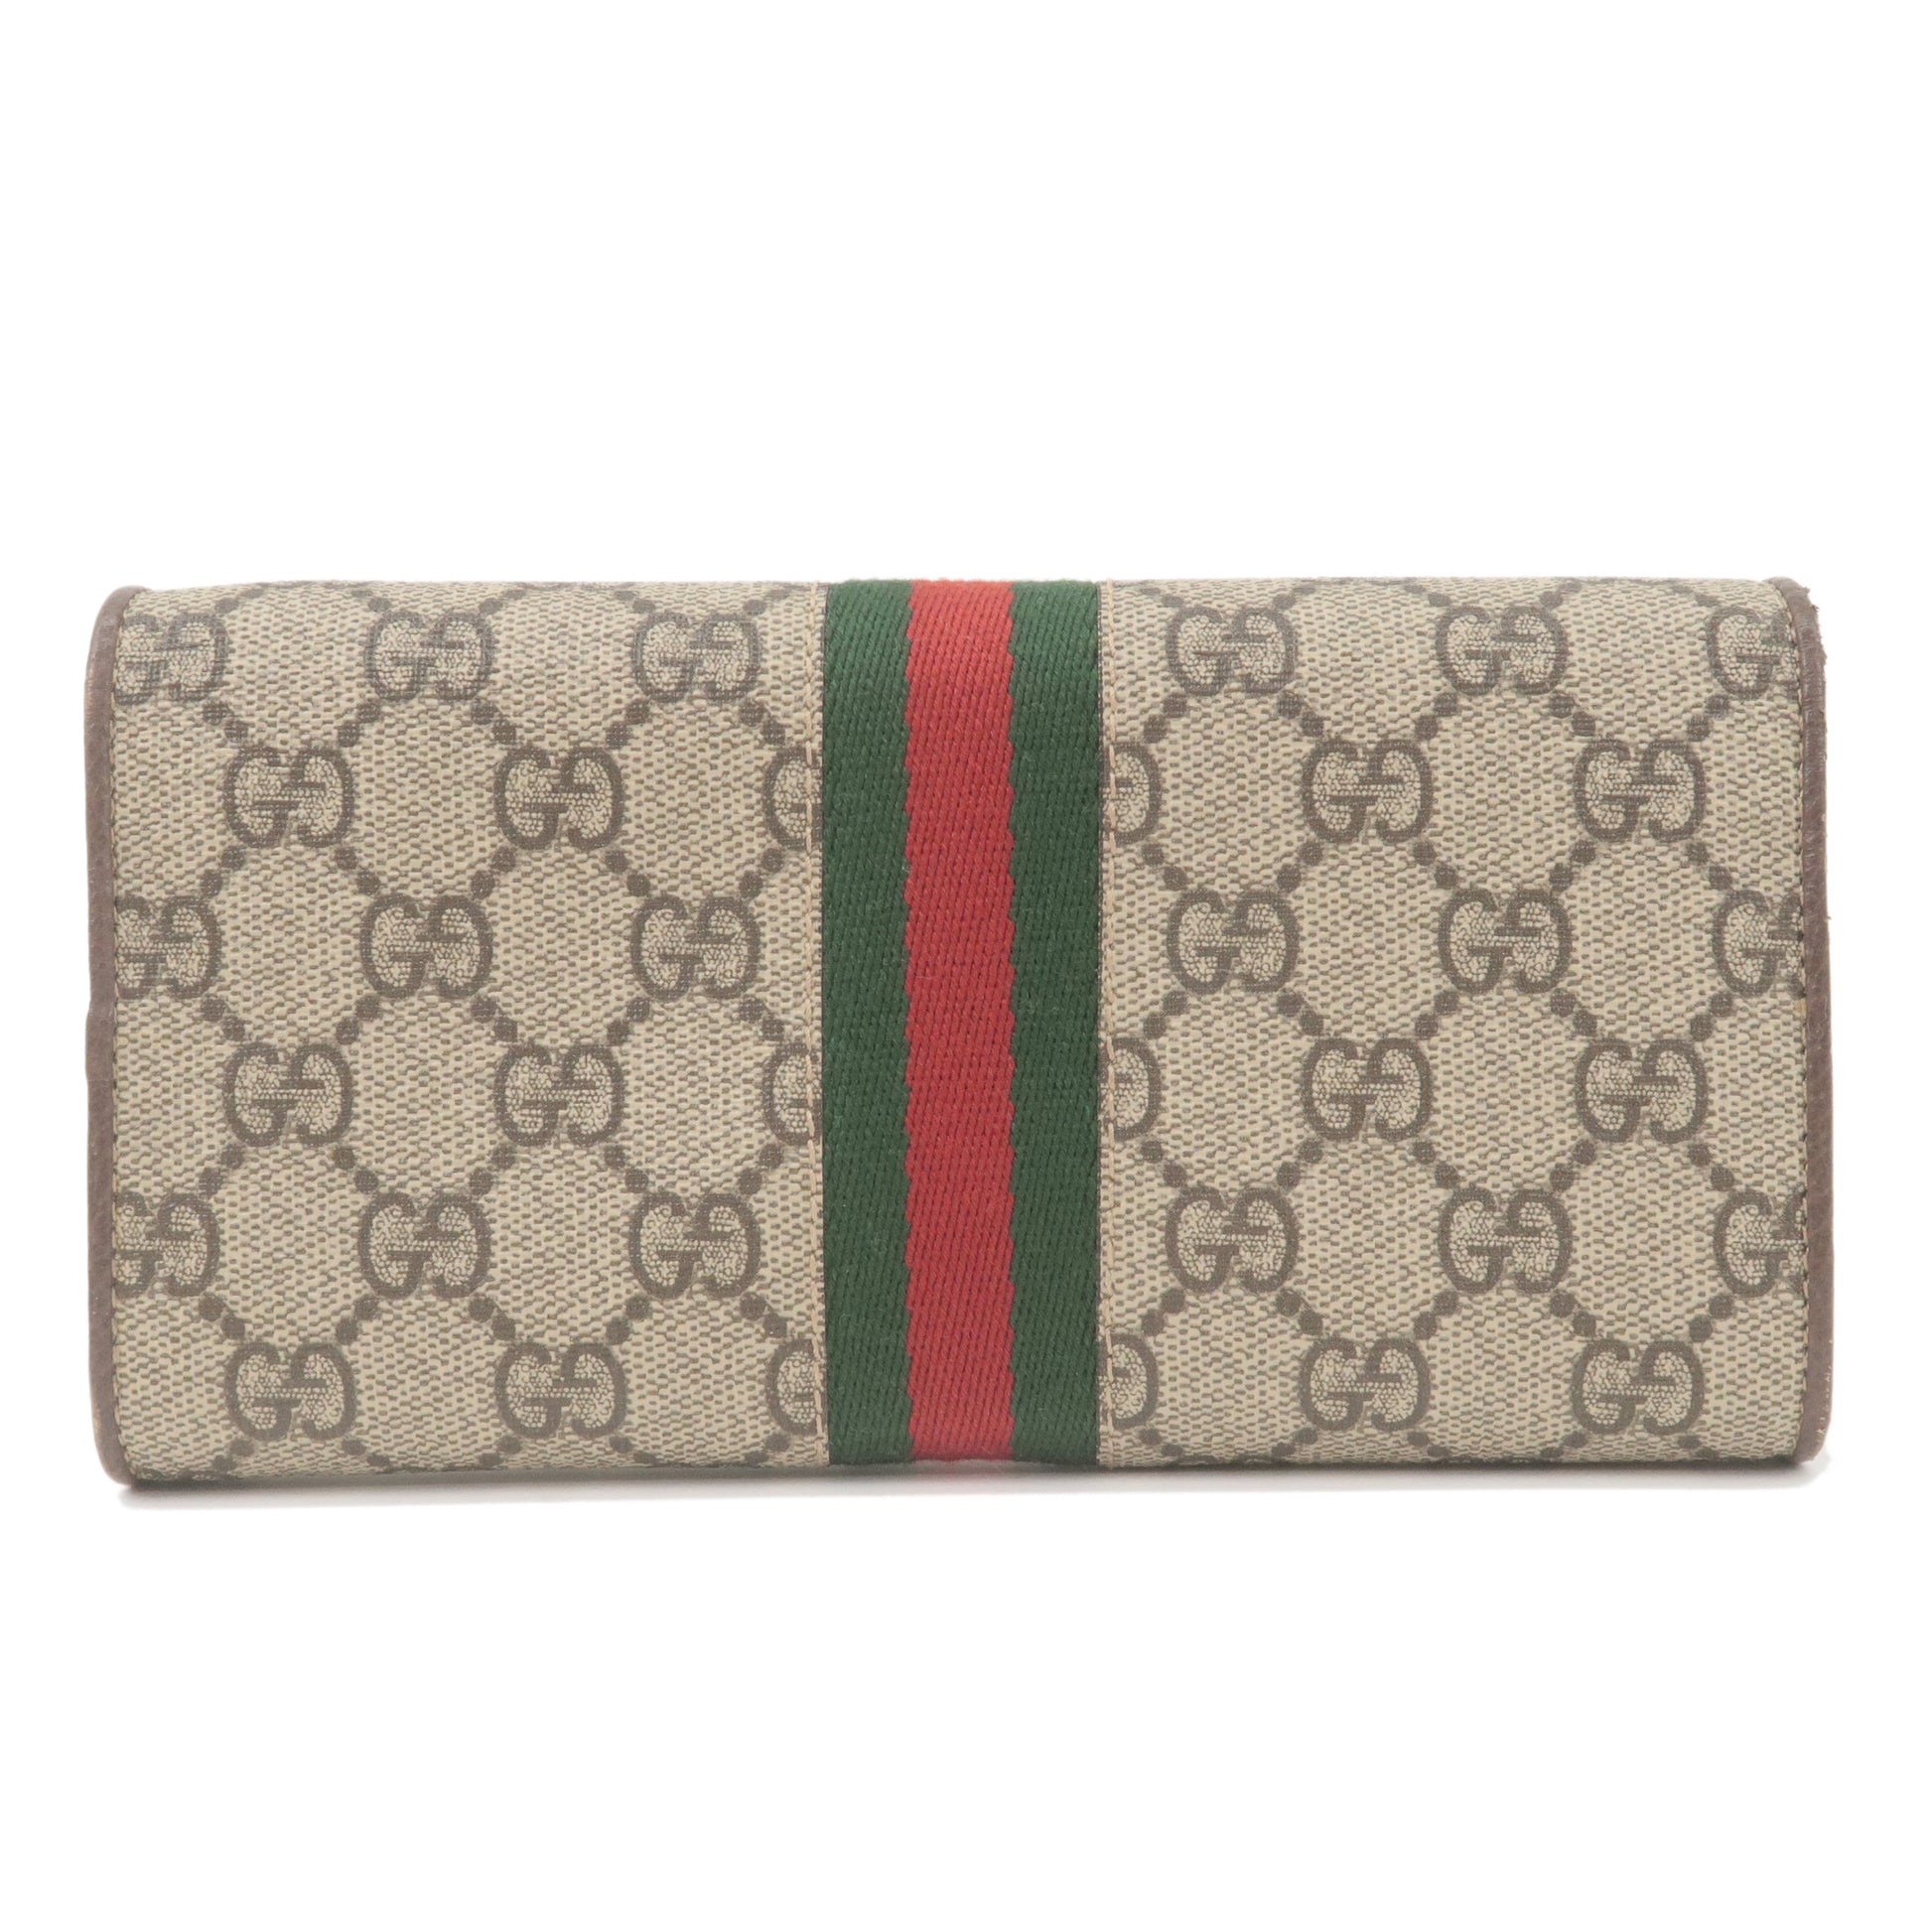 Gucci Ophidia Long Wallet - Brown